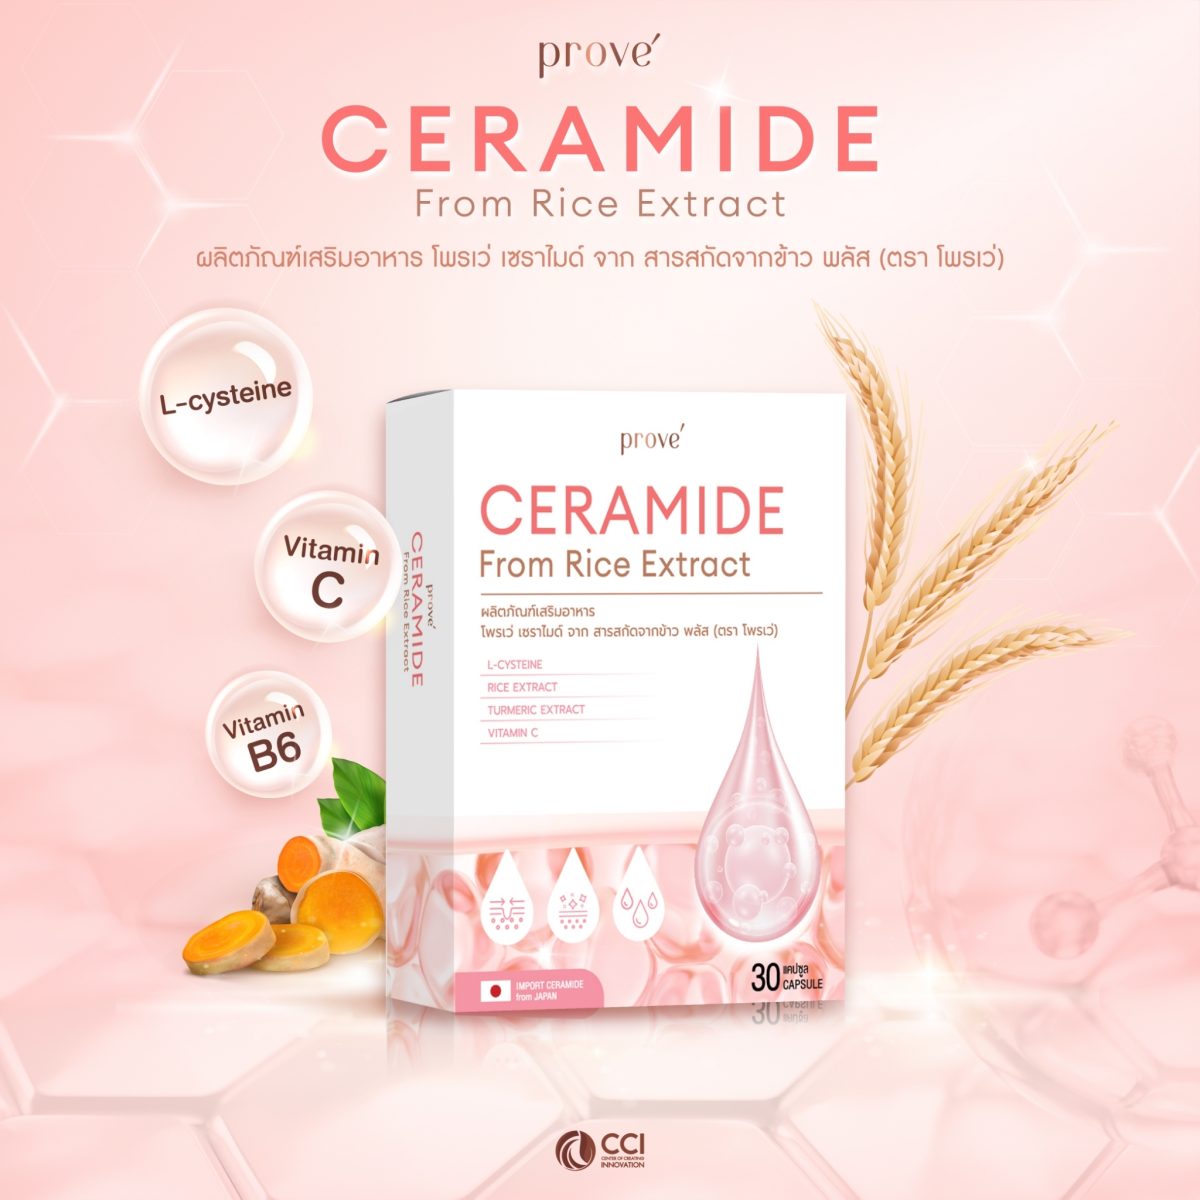 prove’ CERAMIDE From Rice Extract